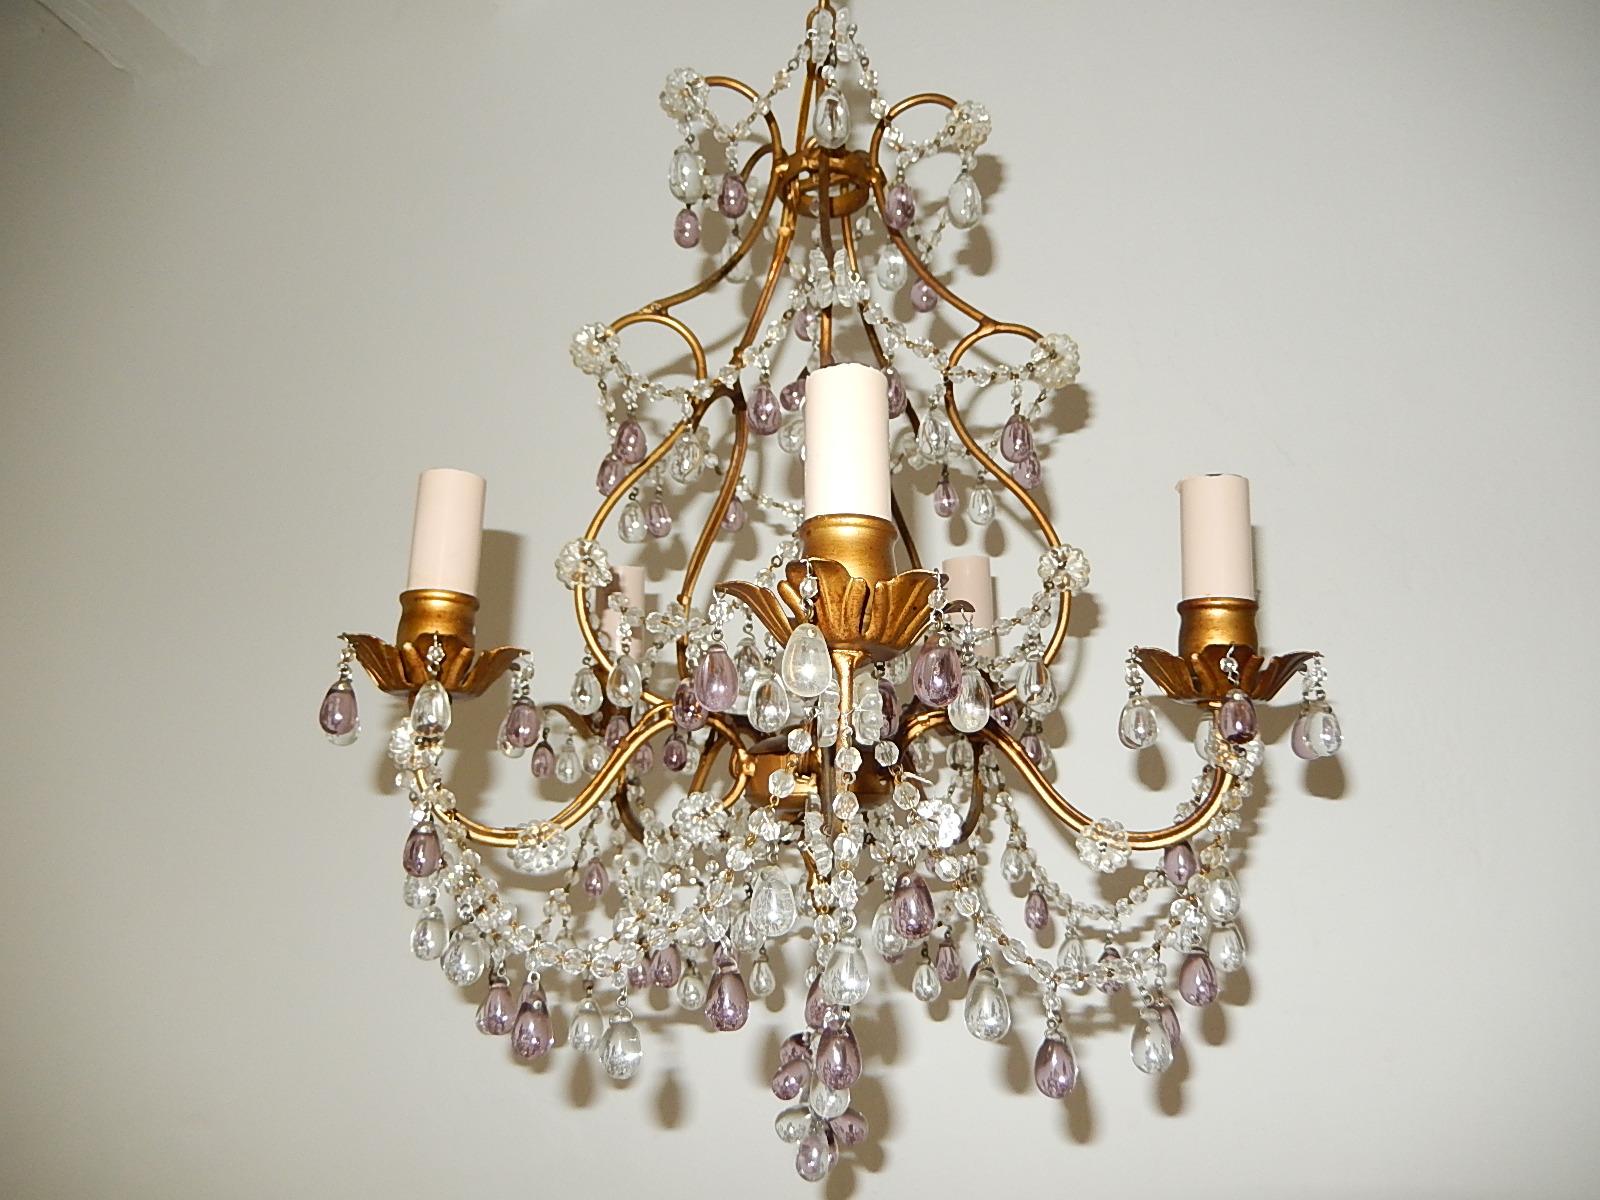 French Beaded Maison Baguès  Amethyst & Clear Murano Drops Chandelier, 1920s For Sale 4